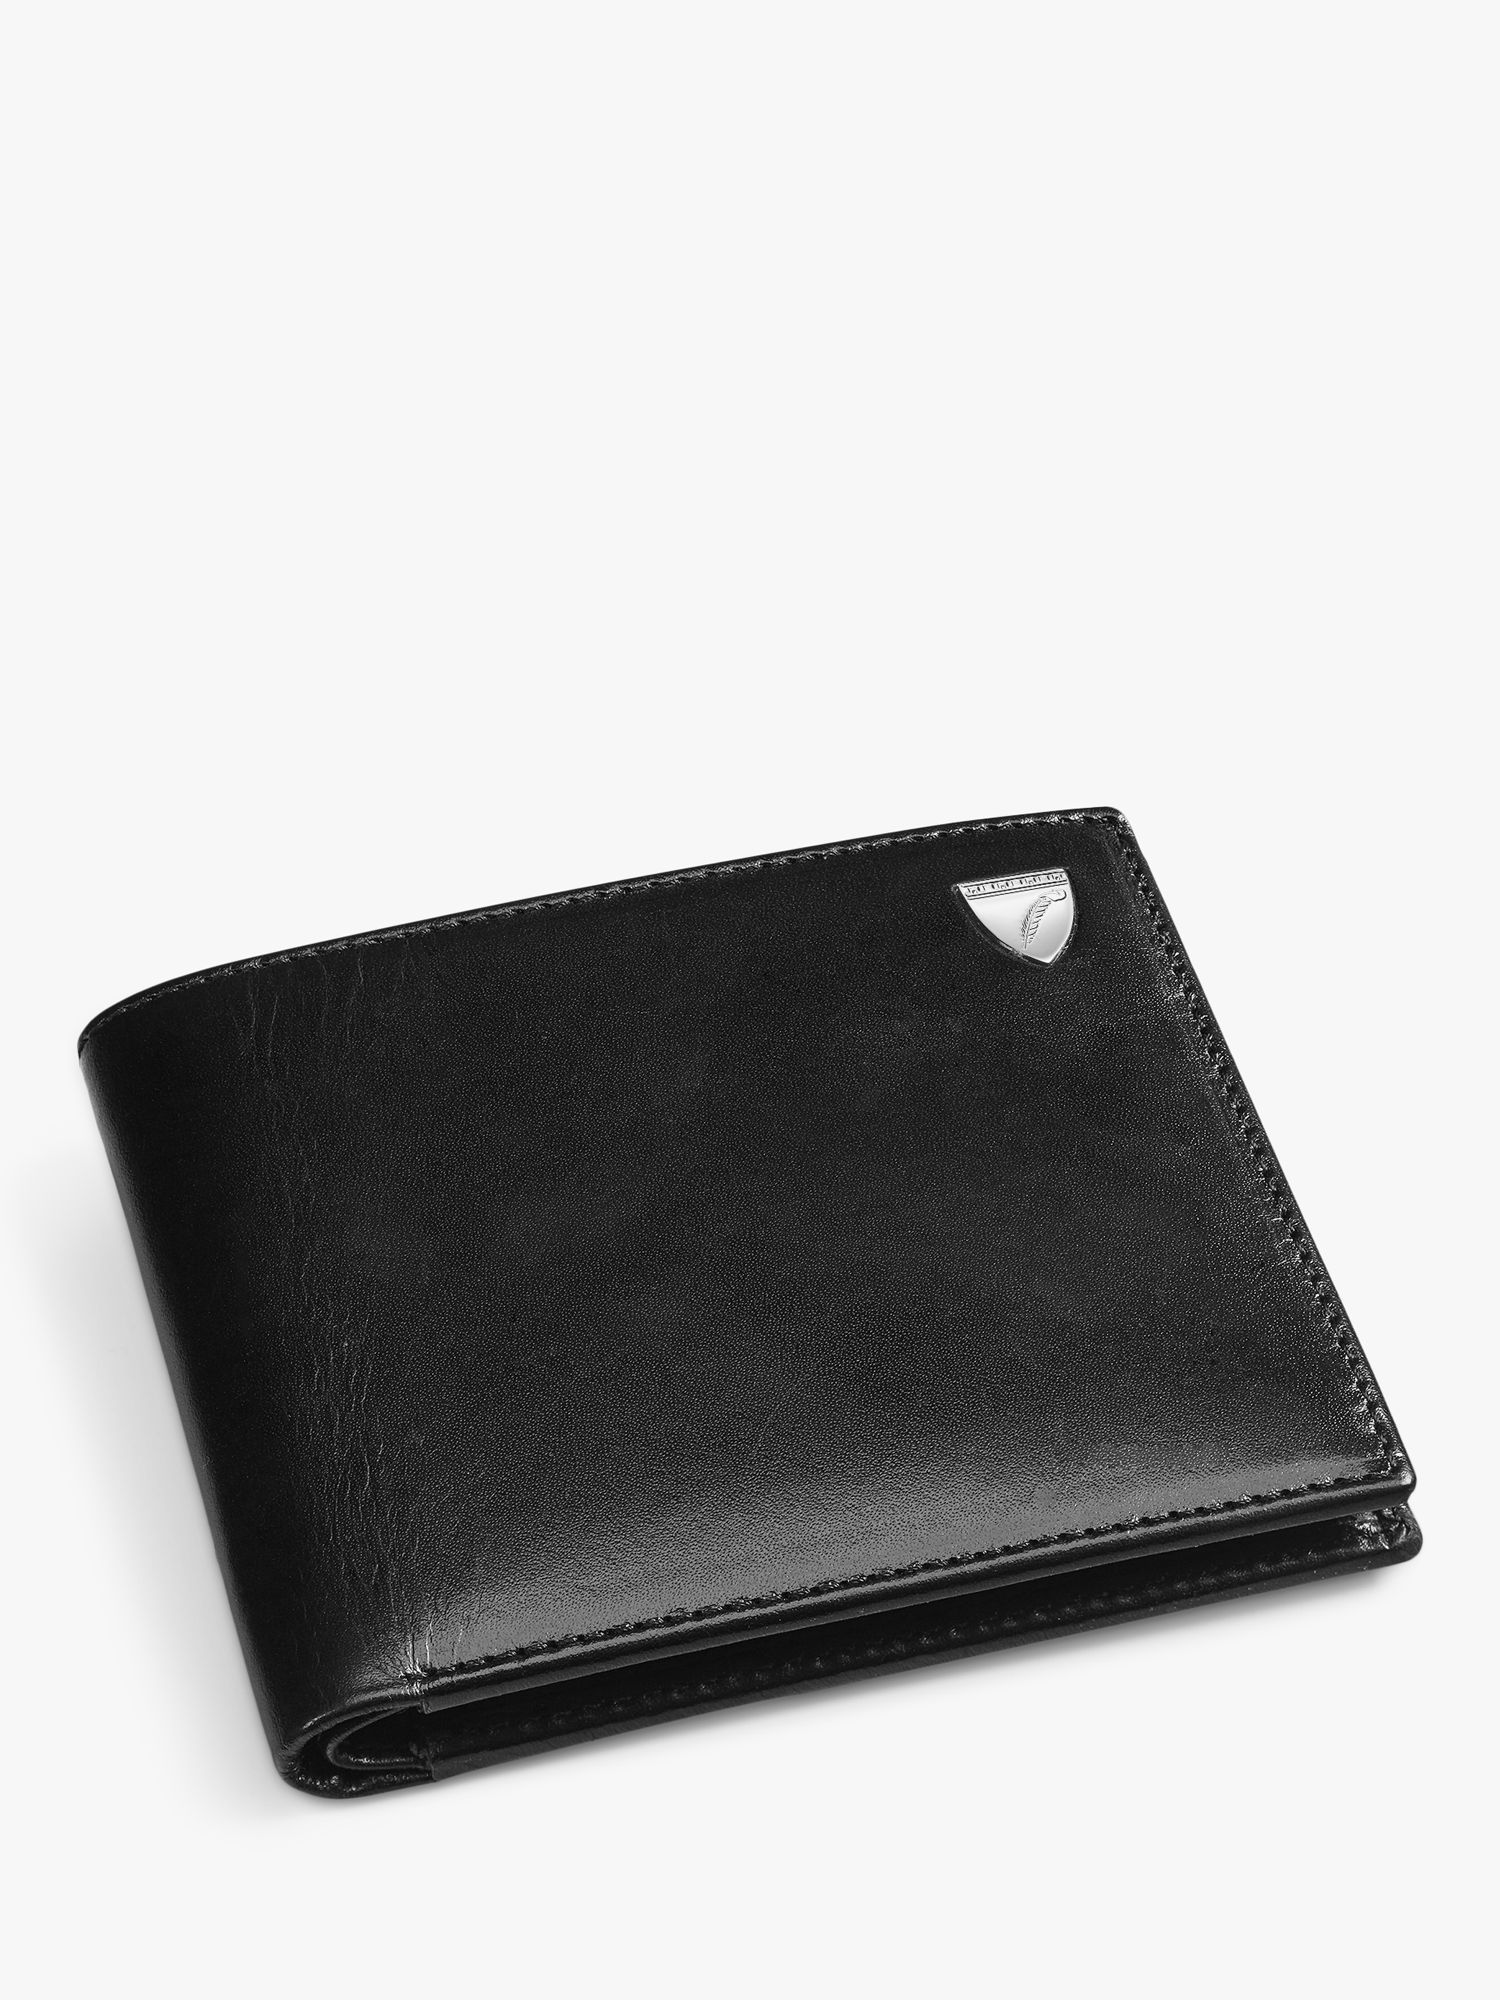 Buy Aspinal of London Single Billfold Smooth Leather Coin Wallet Online at johnlewis.com